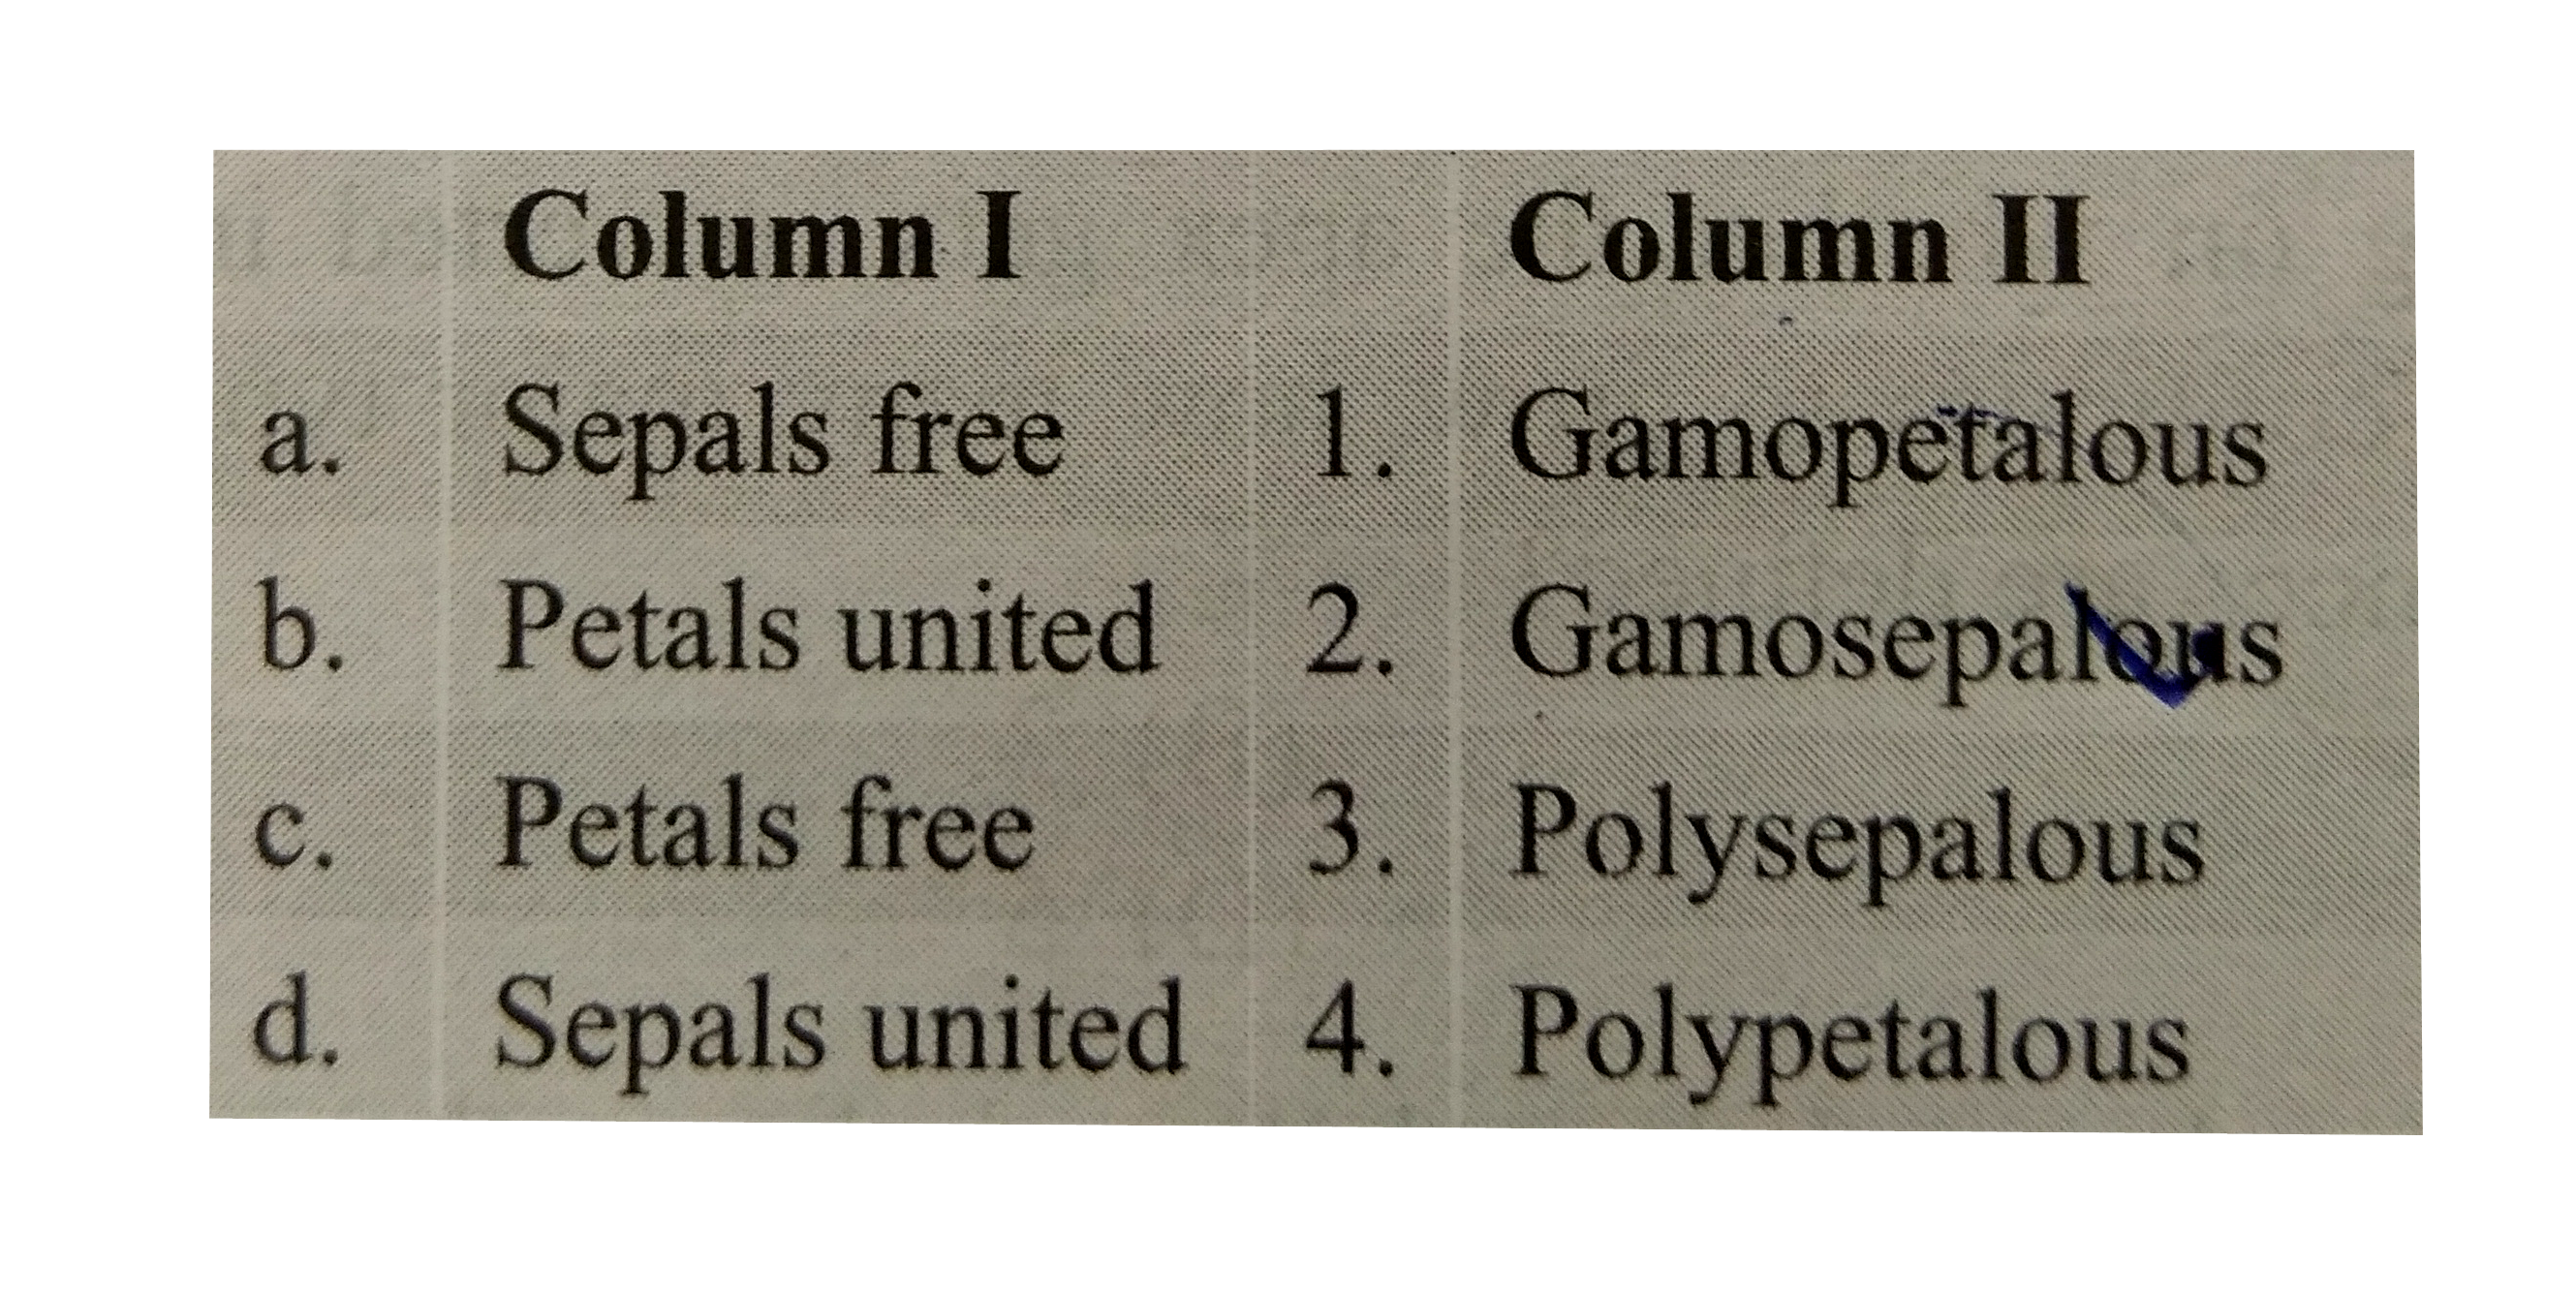 Match the columns I and II choose the correct combination from the options given